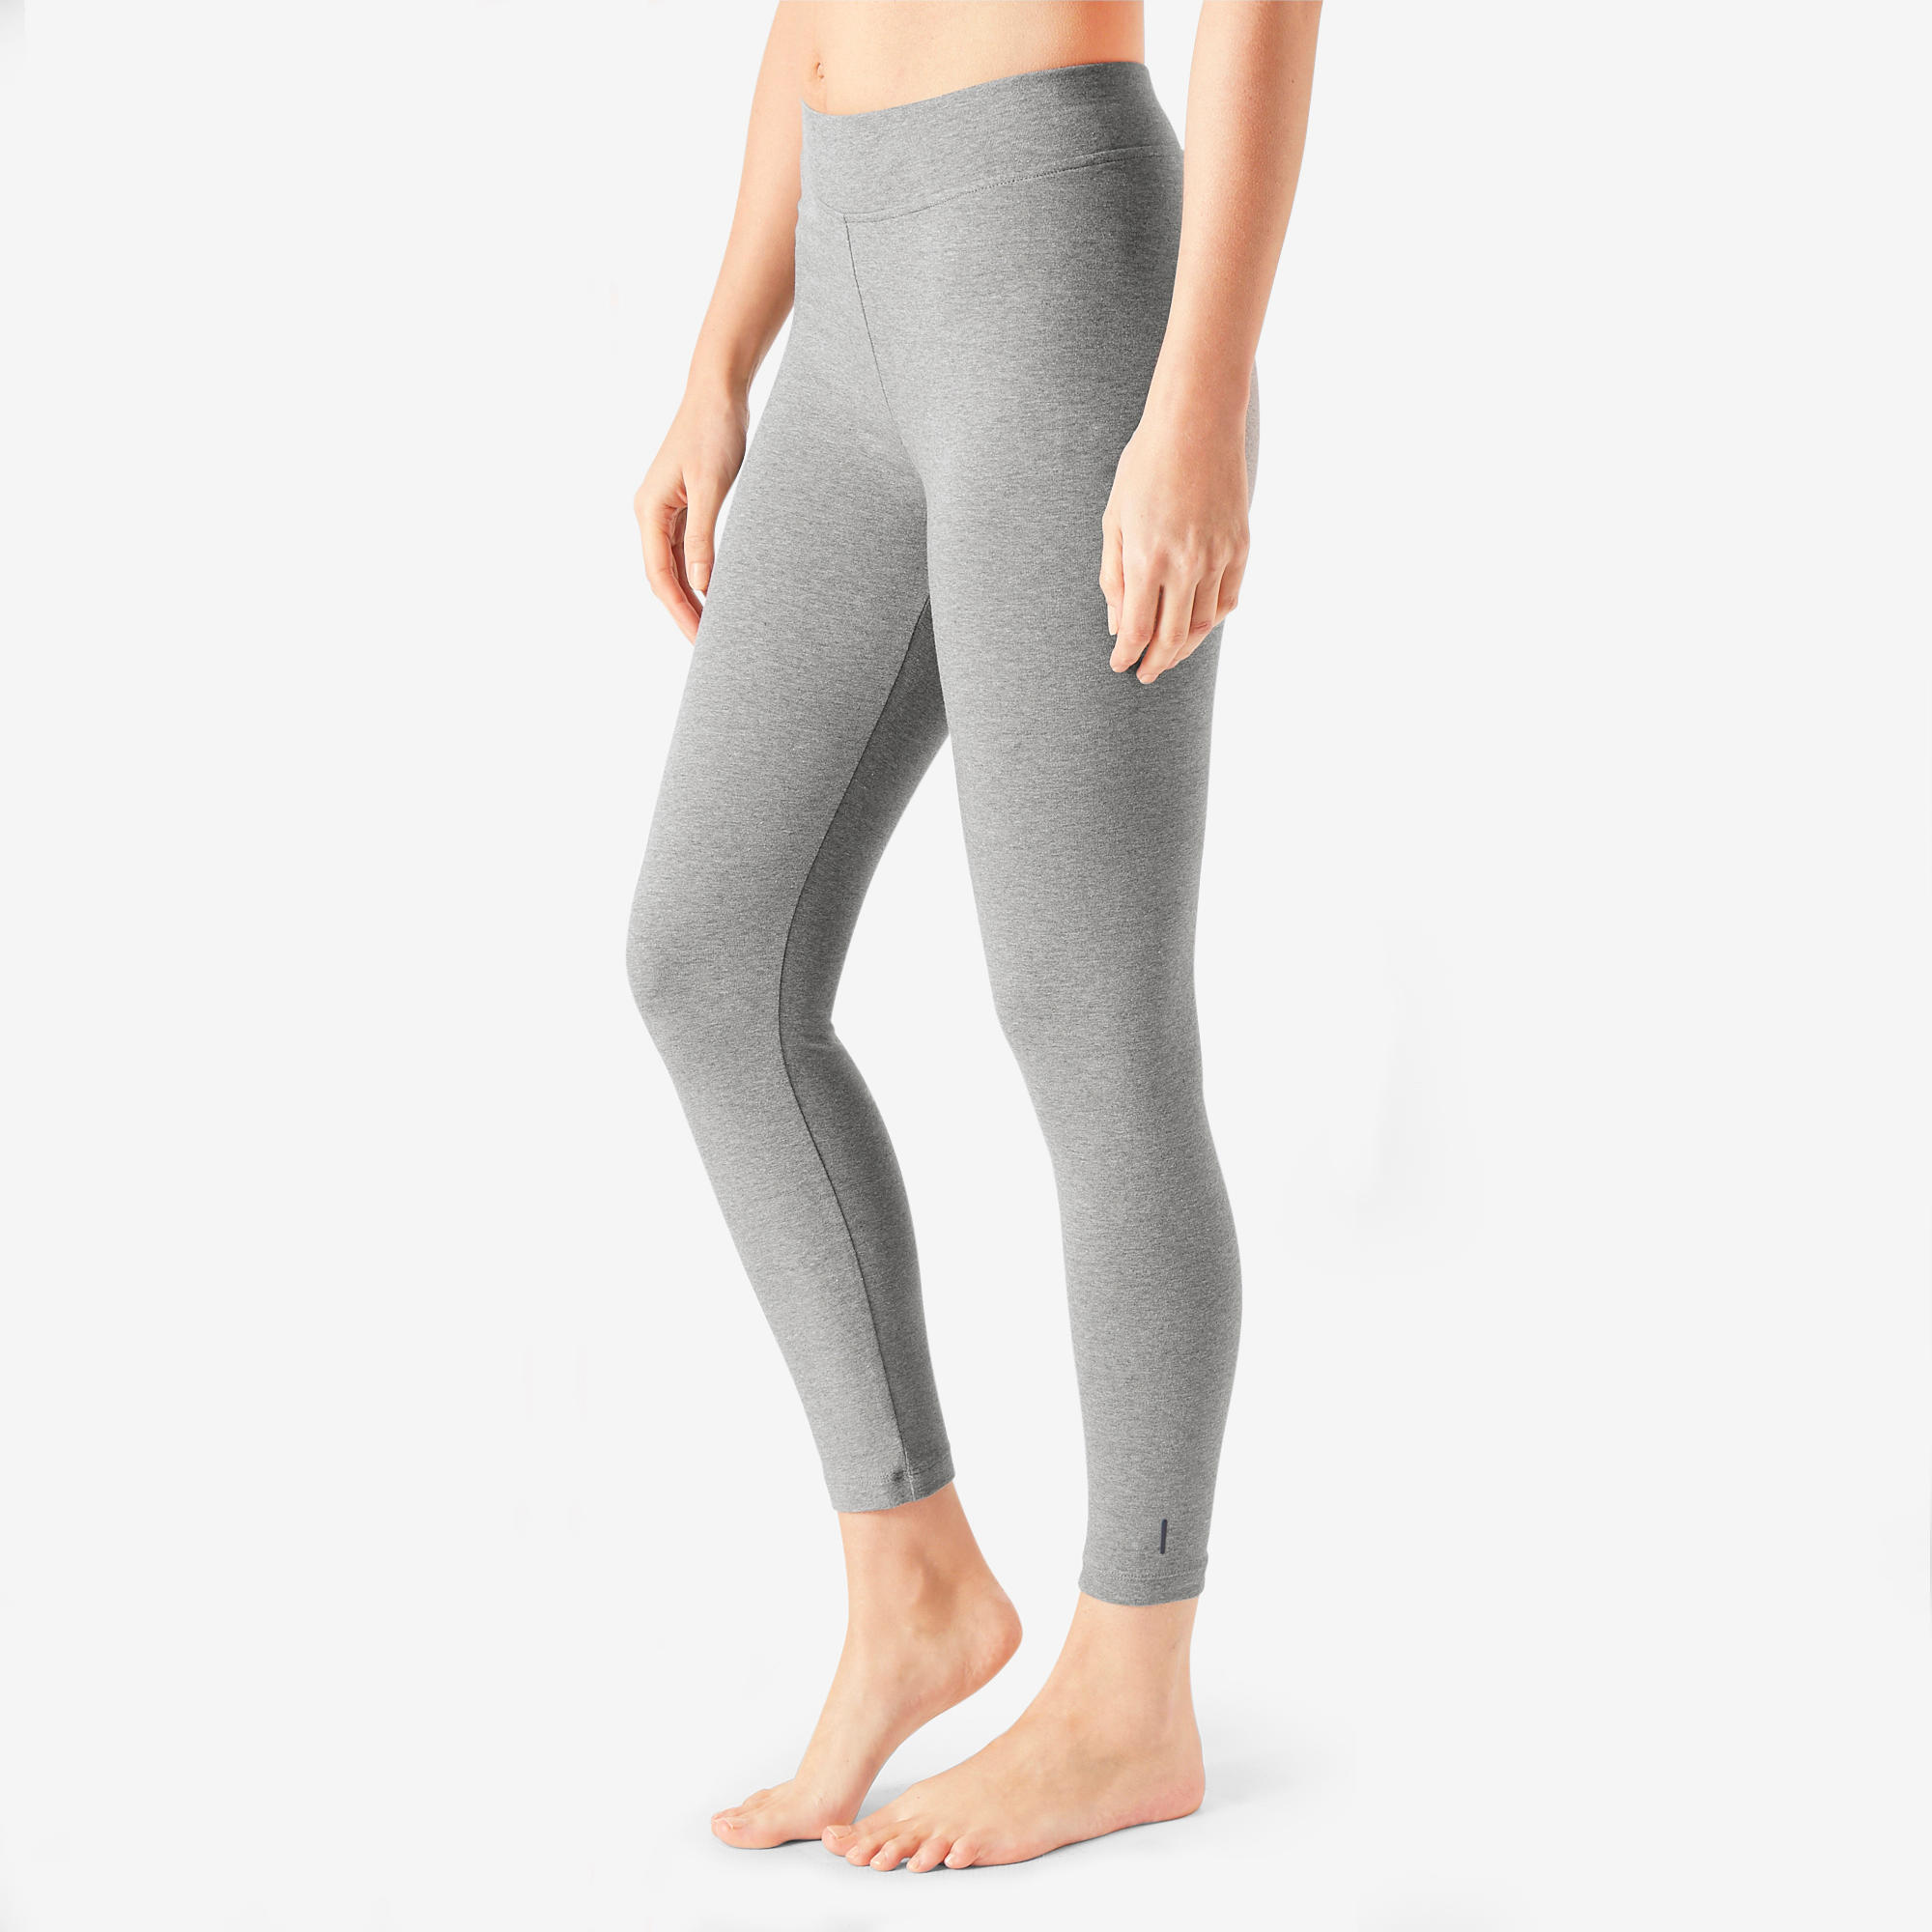 DOMYOS by Decathlon Solid Women Black, Grey Track Pants - Buy DOMYOS by  Decathlon Solid Women Black, Grey Track Pants Online at Best Prices in  India